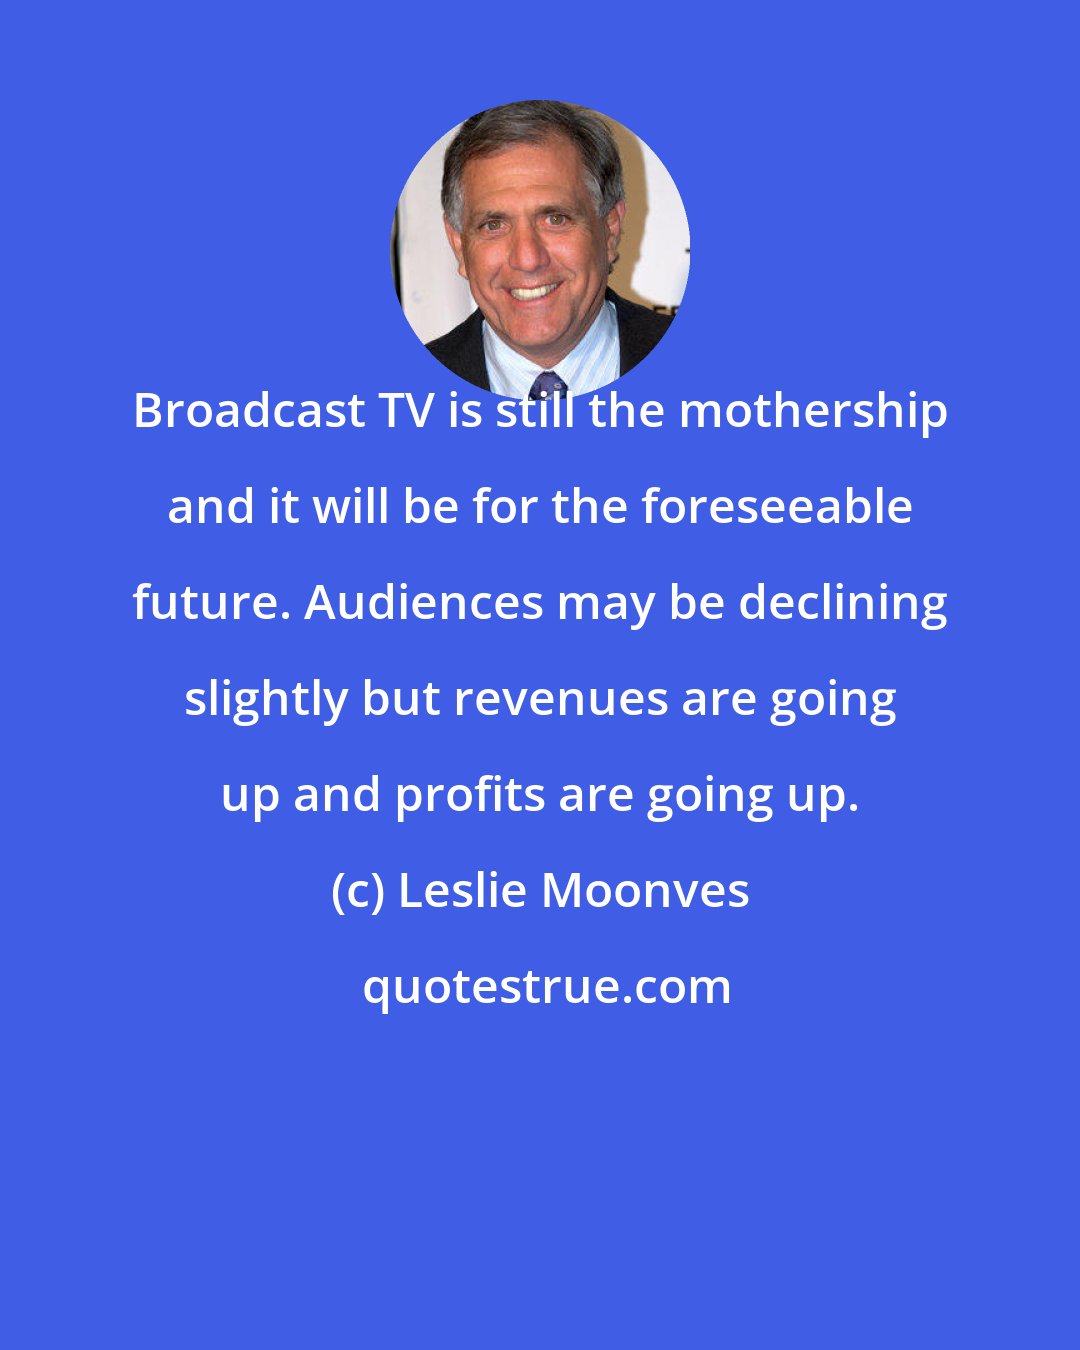 Leslie Moonves: Broadcast TV is still the mothership and it will be for the foreseeable future. Audiences may be declining slightly but revenues are going up and profits are going up.